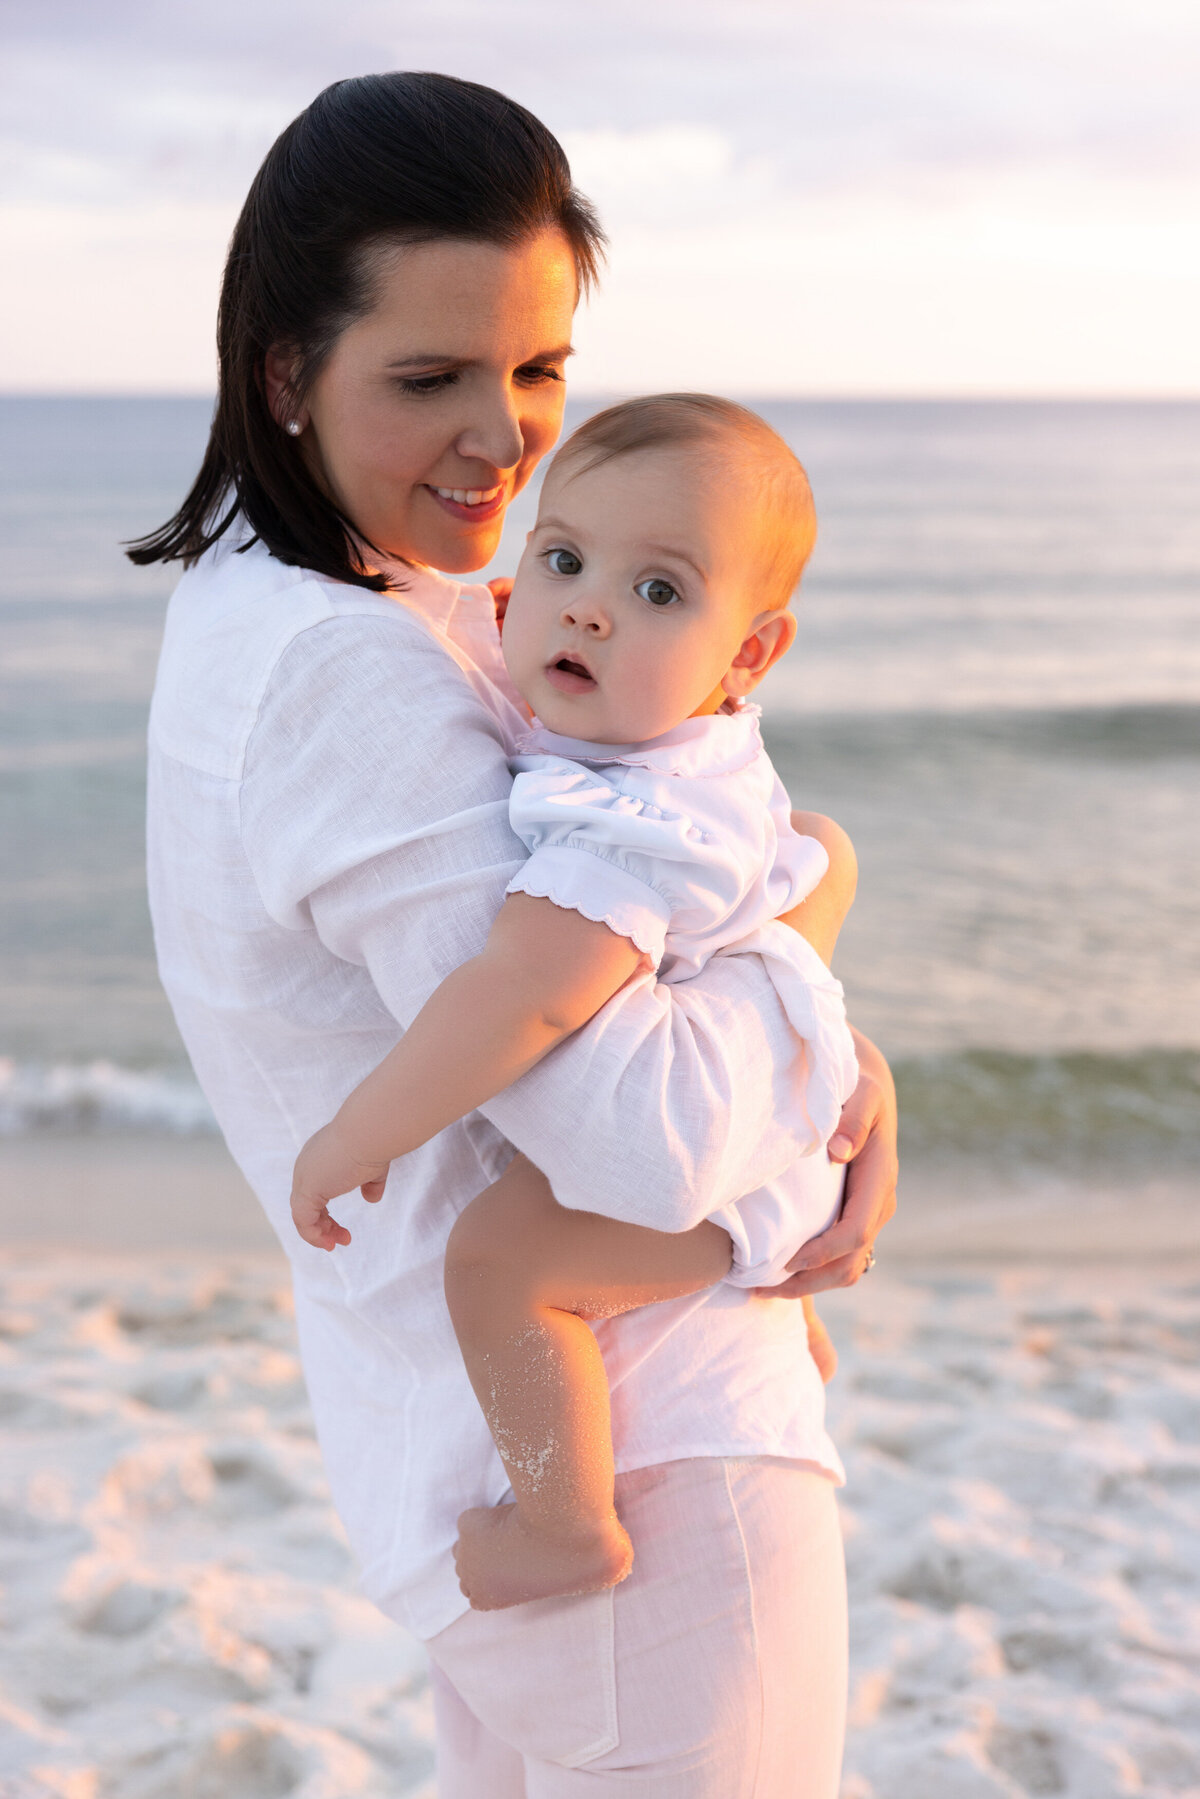 A mother holding a small baby at the beach